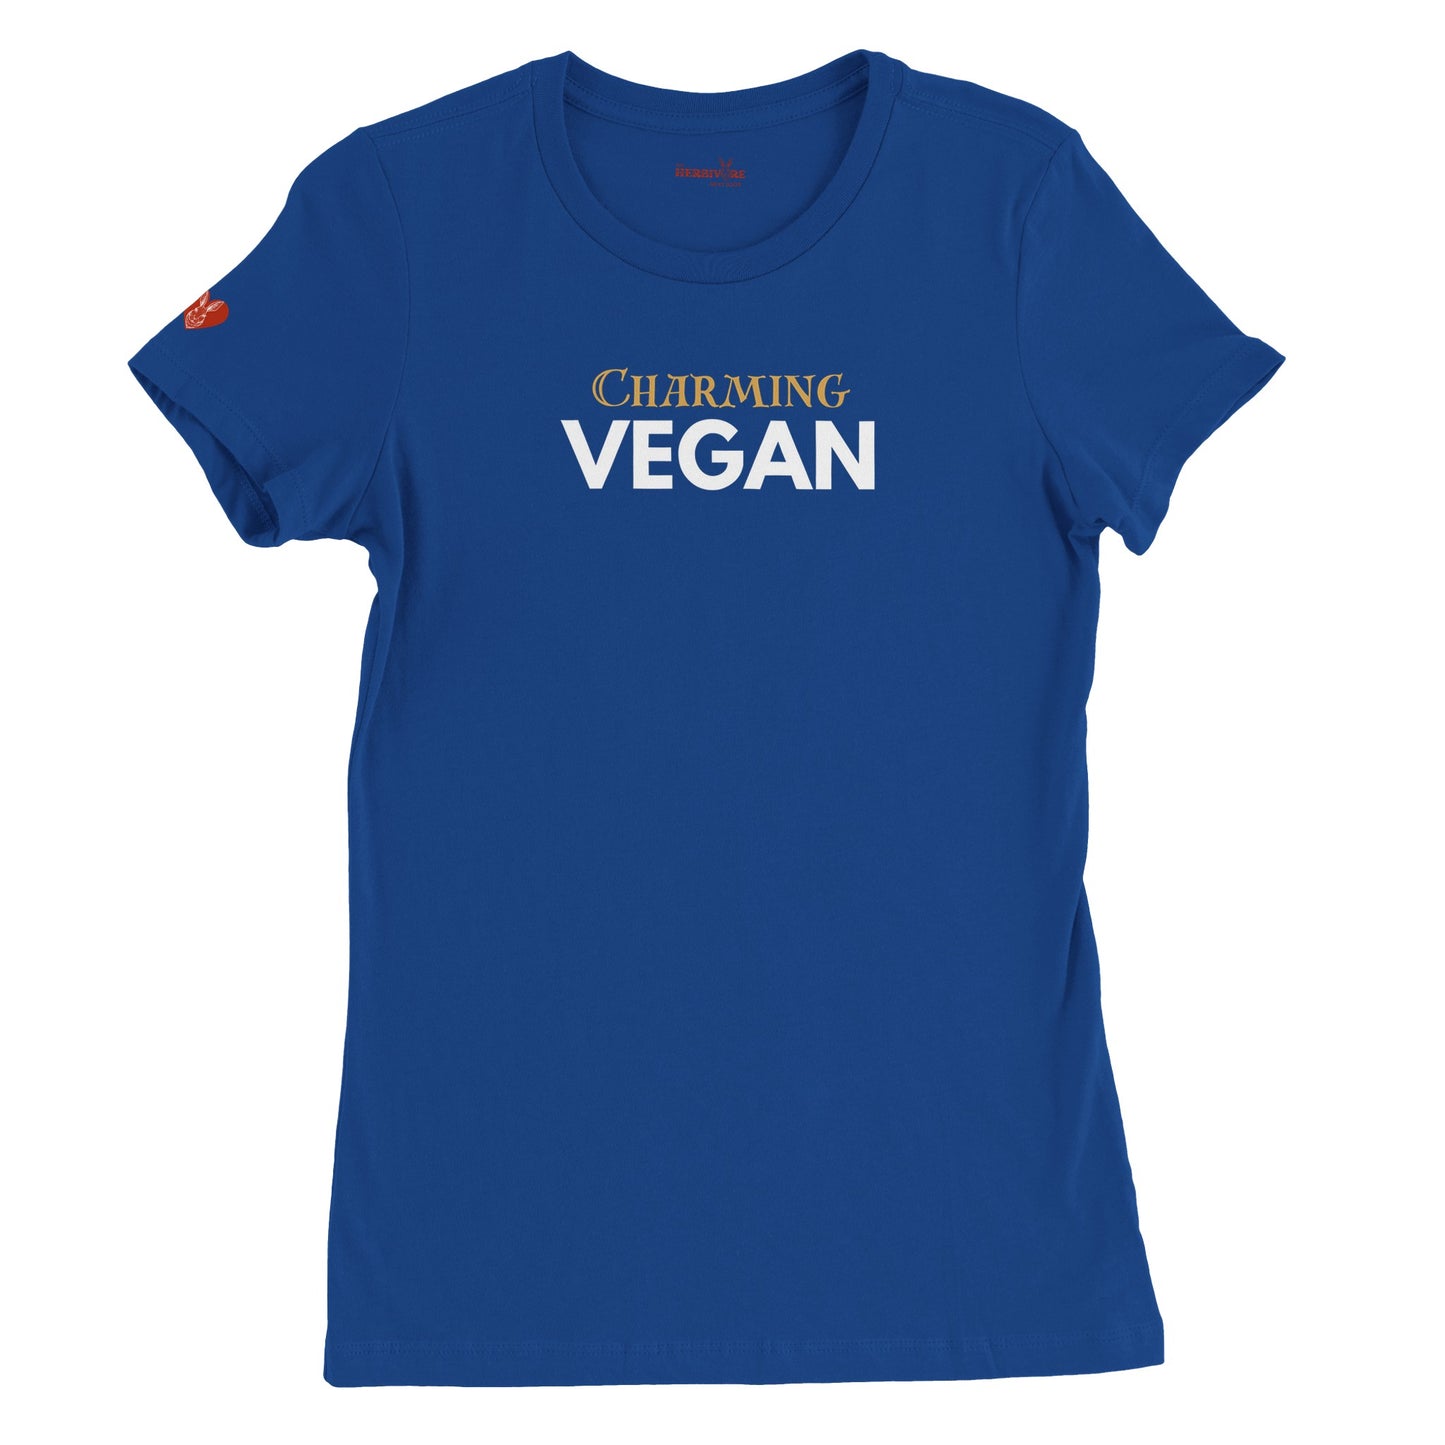 Charming Vegan - Women's Style (Women's run small - get one size up from normal unisex)